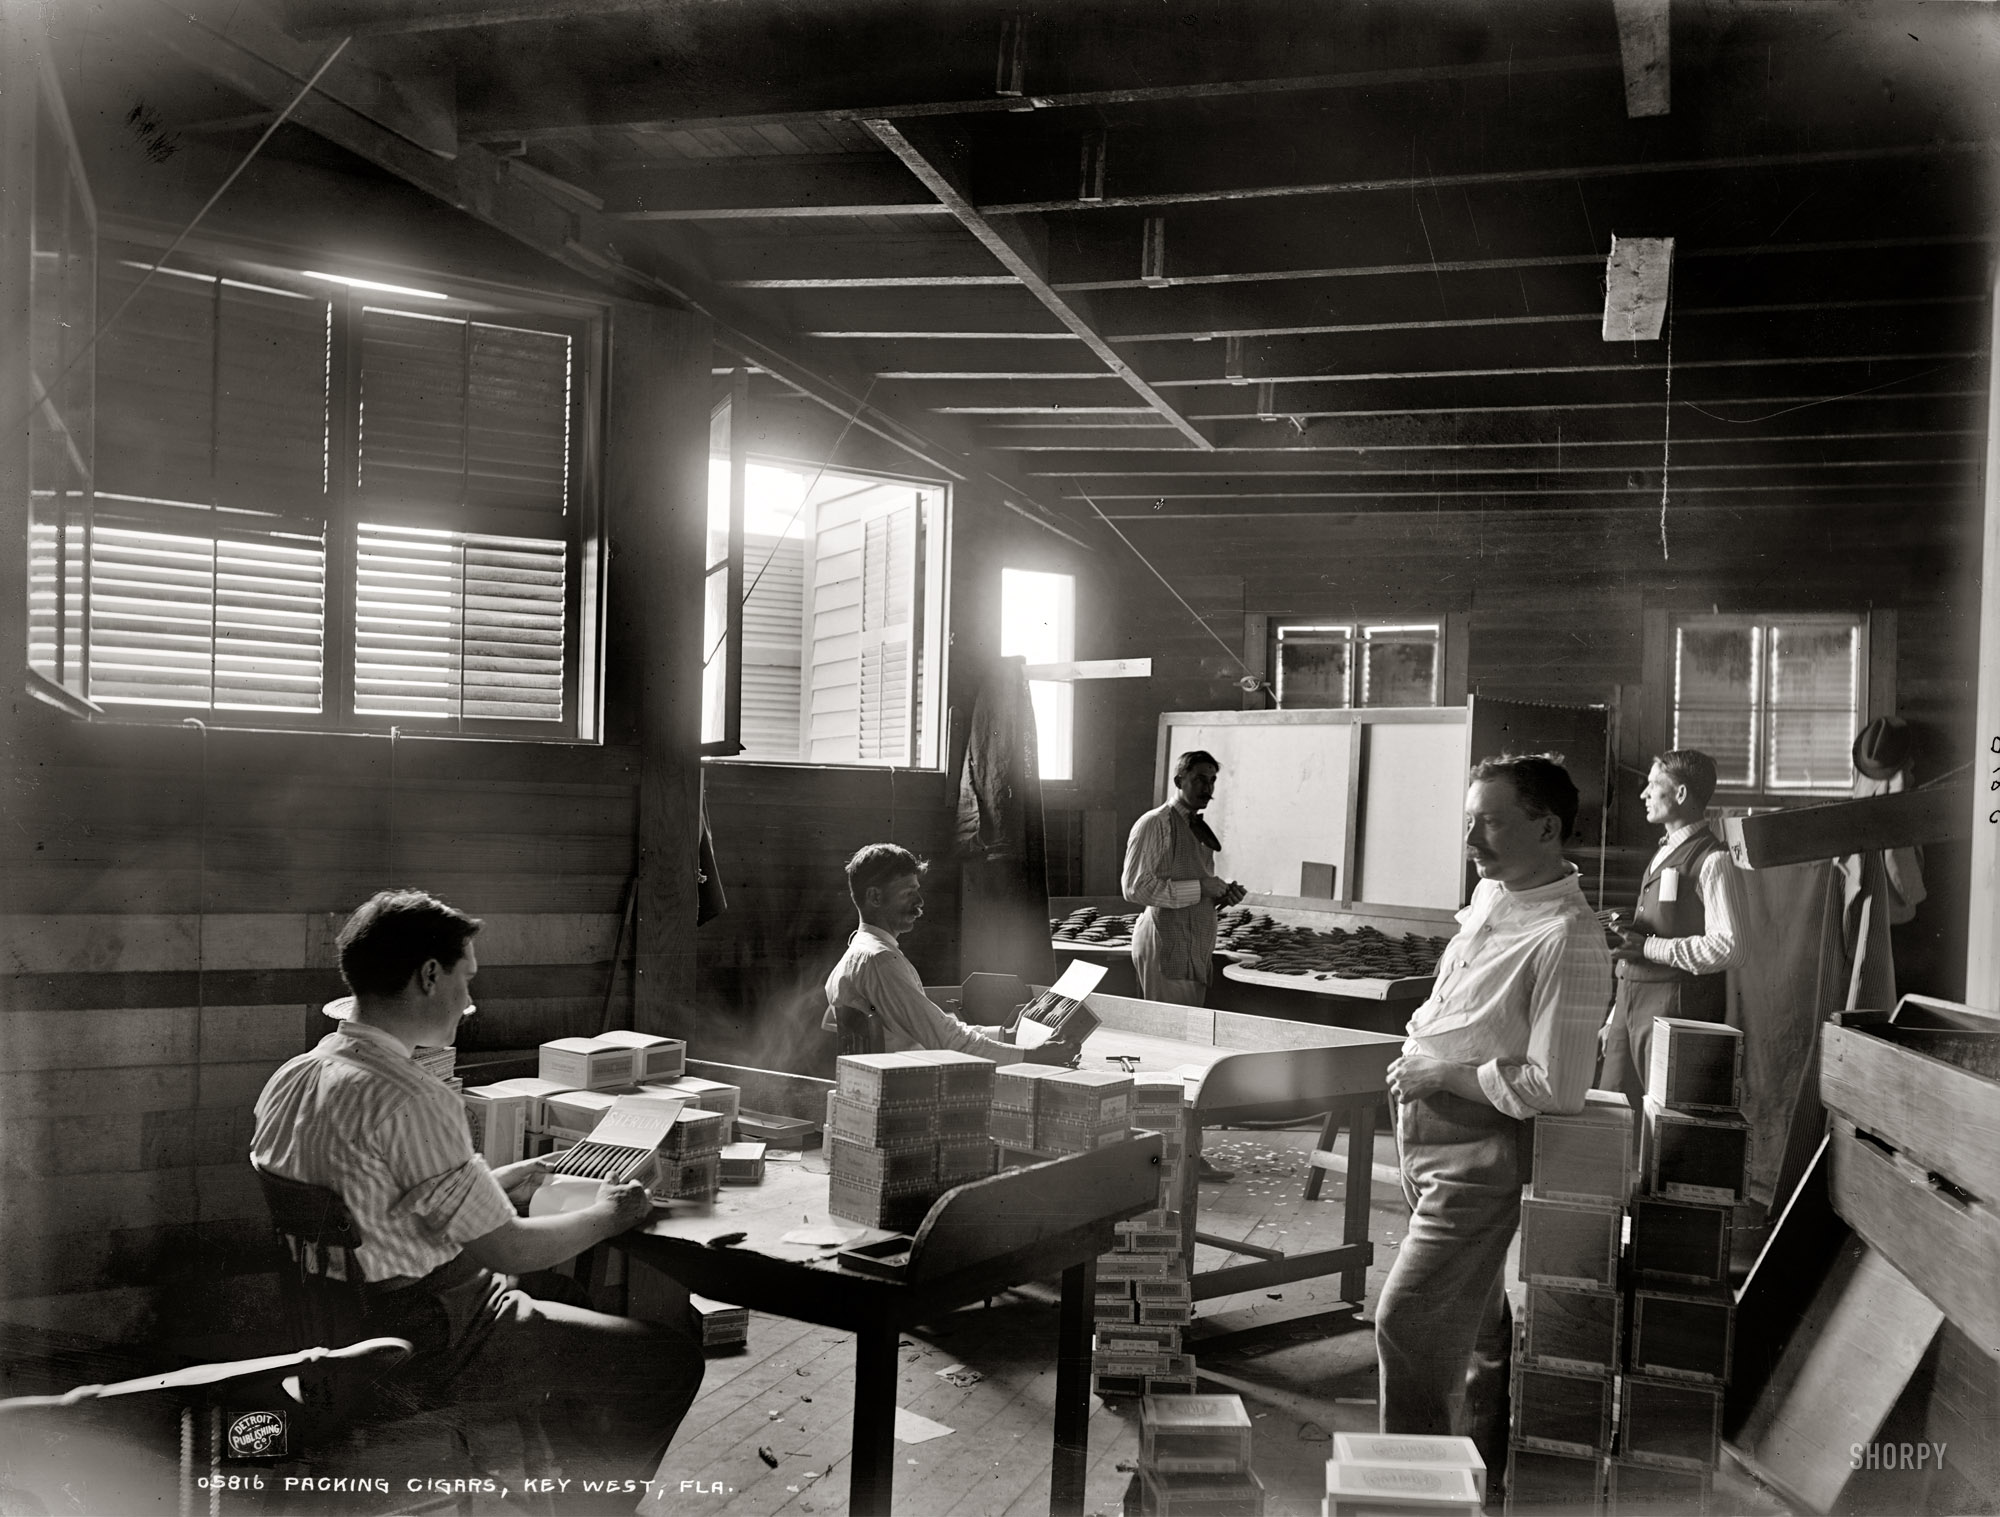 Key West, Florida, circa 1900. "Packing cigars." 8x10 inch dry plate glass negative, Detroit Publishing Company. View full size.